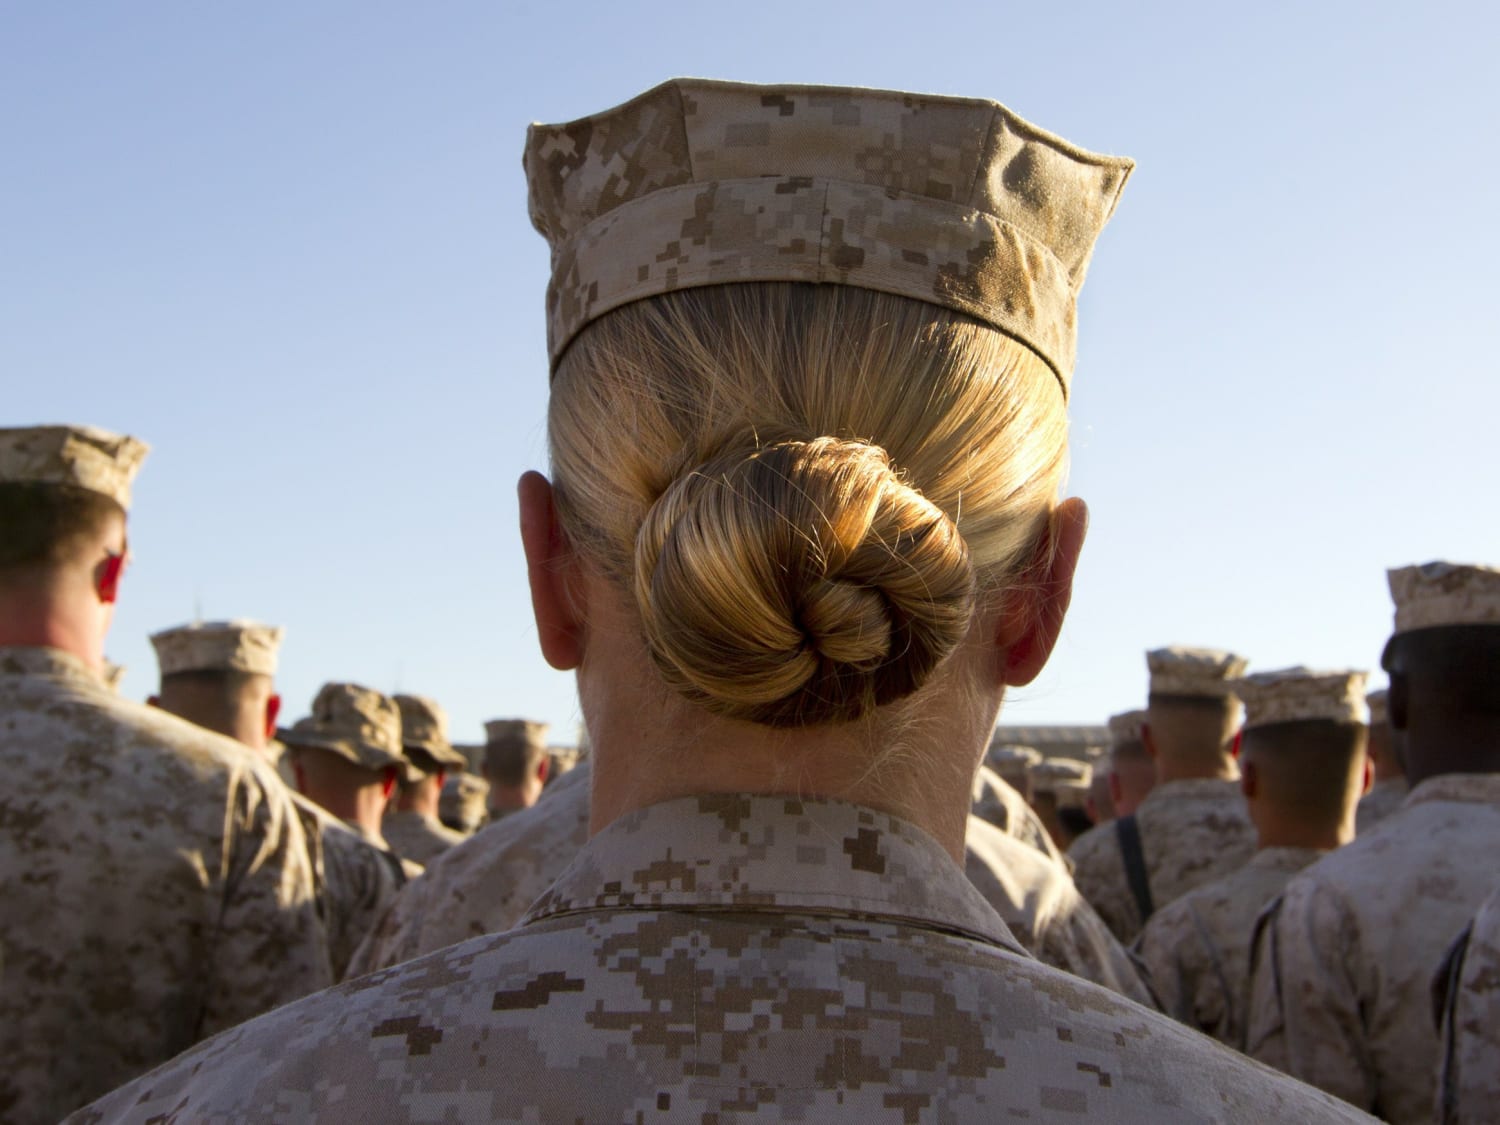 brenda bruso recommends Naked Male Marines